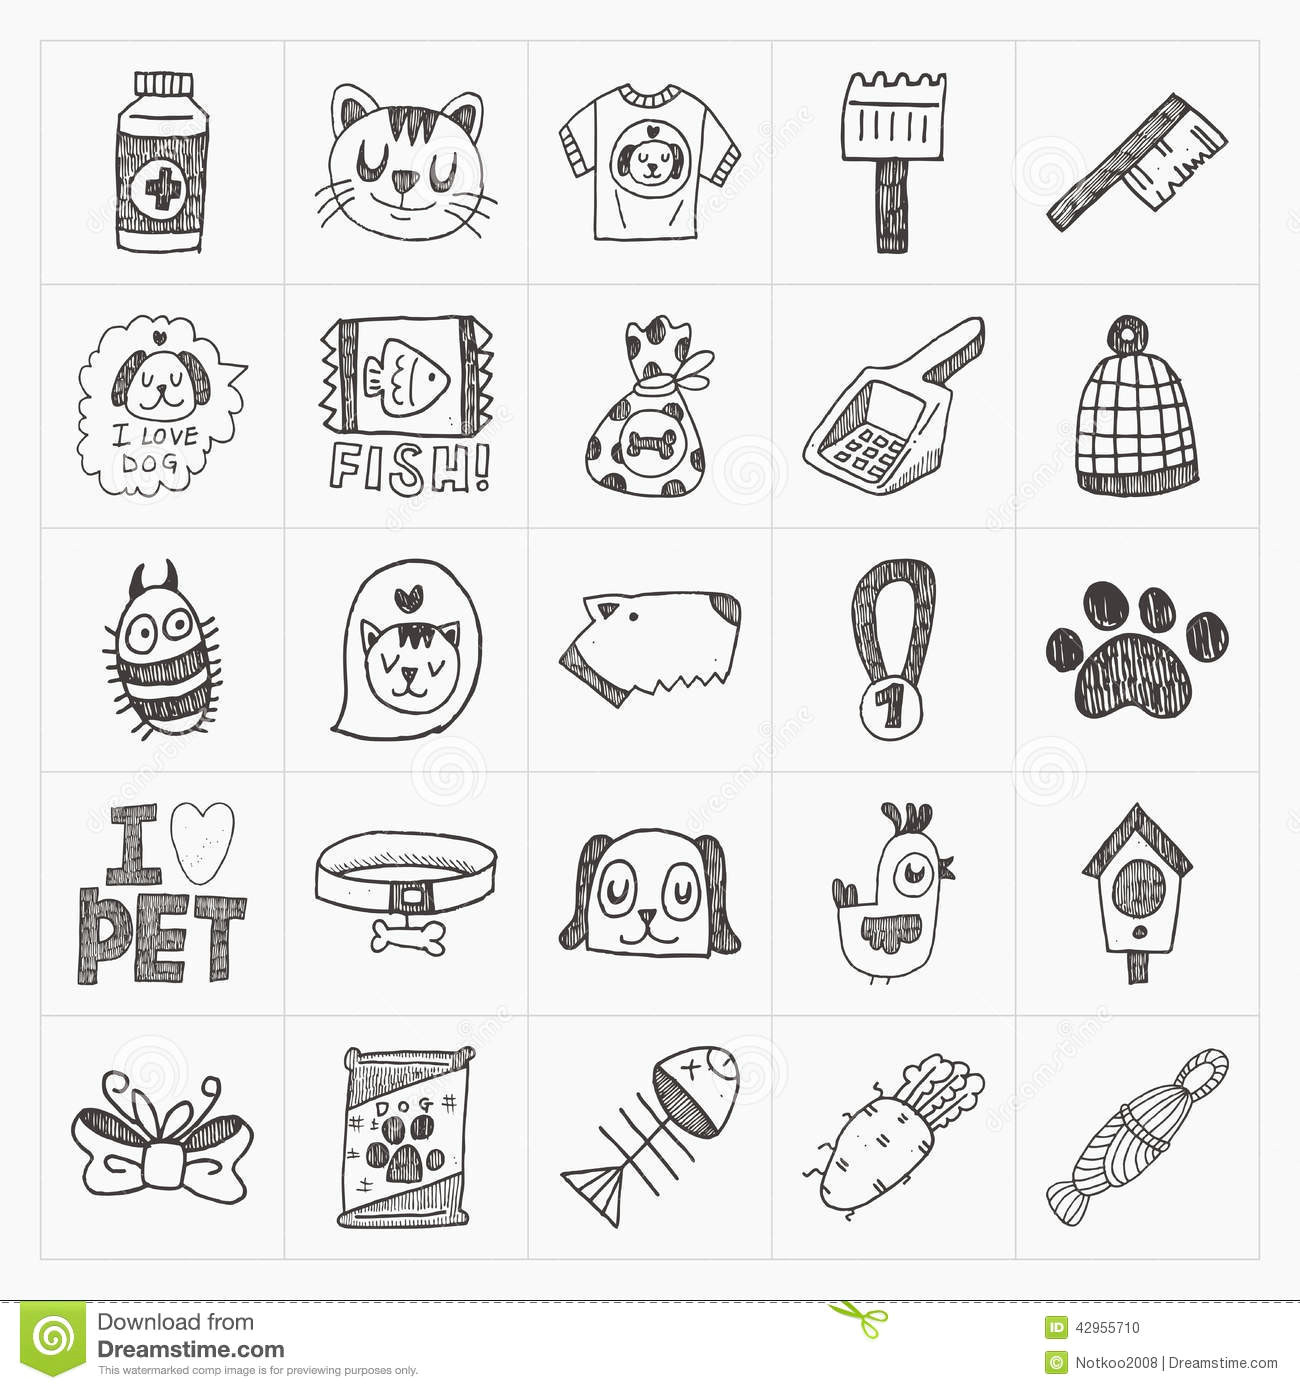 Drawing Dog Doodle Doodle Pet Icons Set Stock Vector Illustration Of Draw 42955710